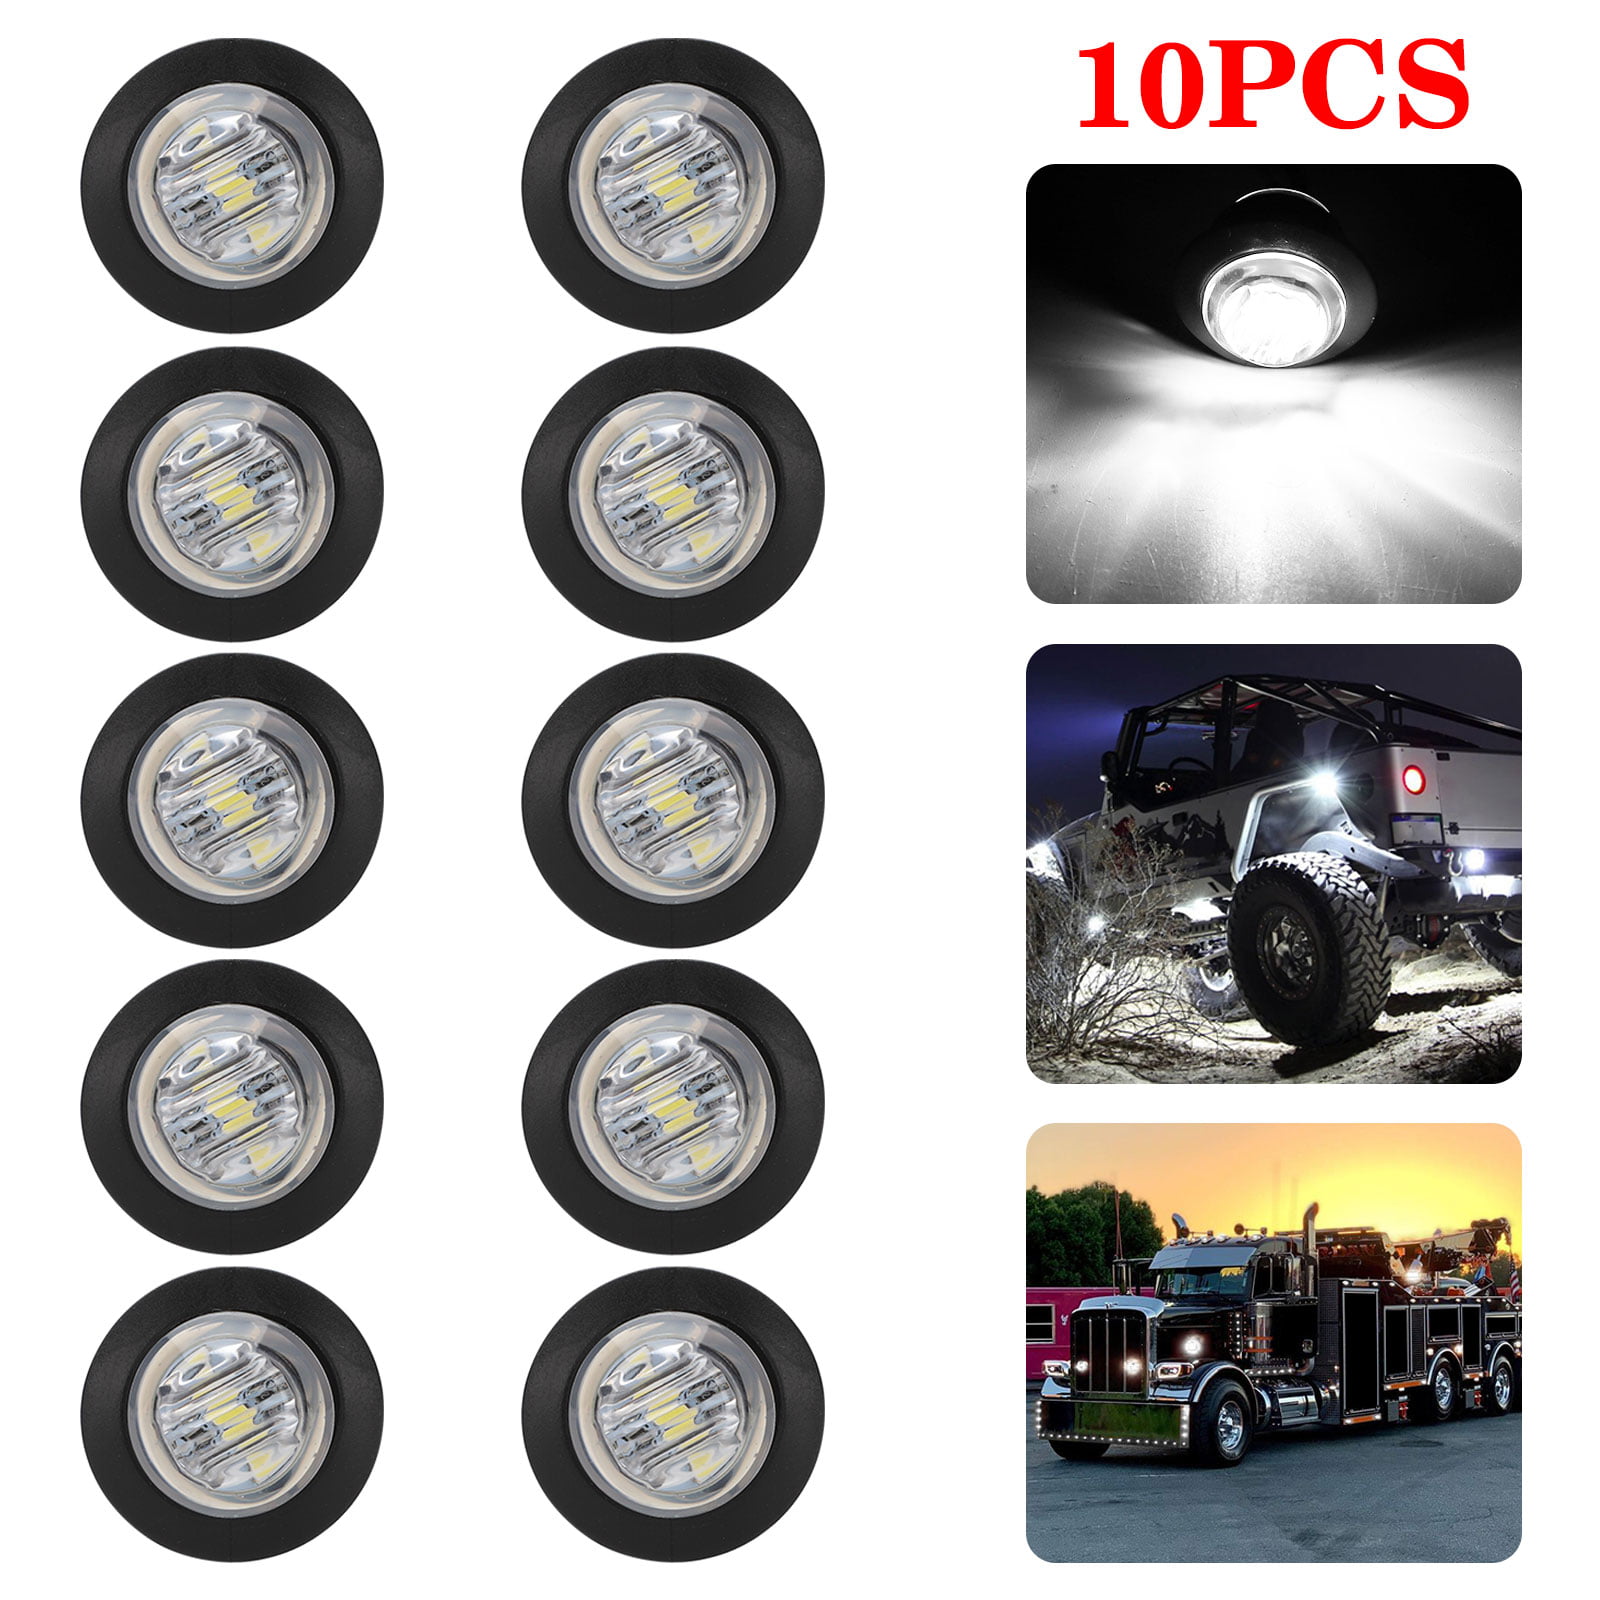 1PCS LEDUR LED Rock Light White Kits LED Neon Underglow Light Compatible with Jeep ATV SUV Offroad Truck Boat Underbody Glow Trail Rig Lamp Waterproof 